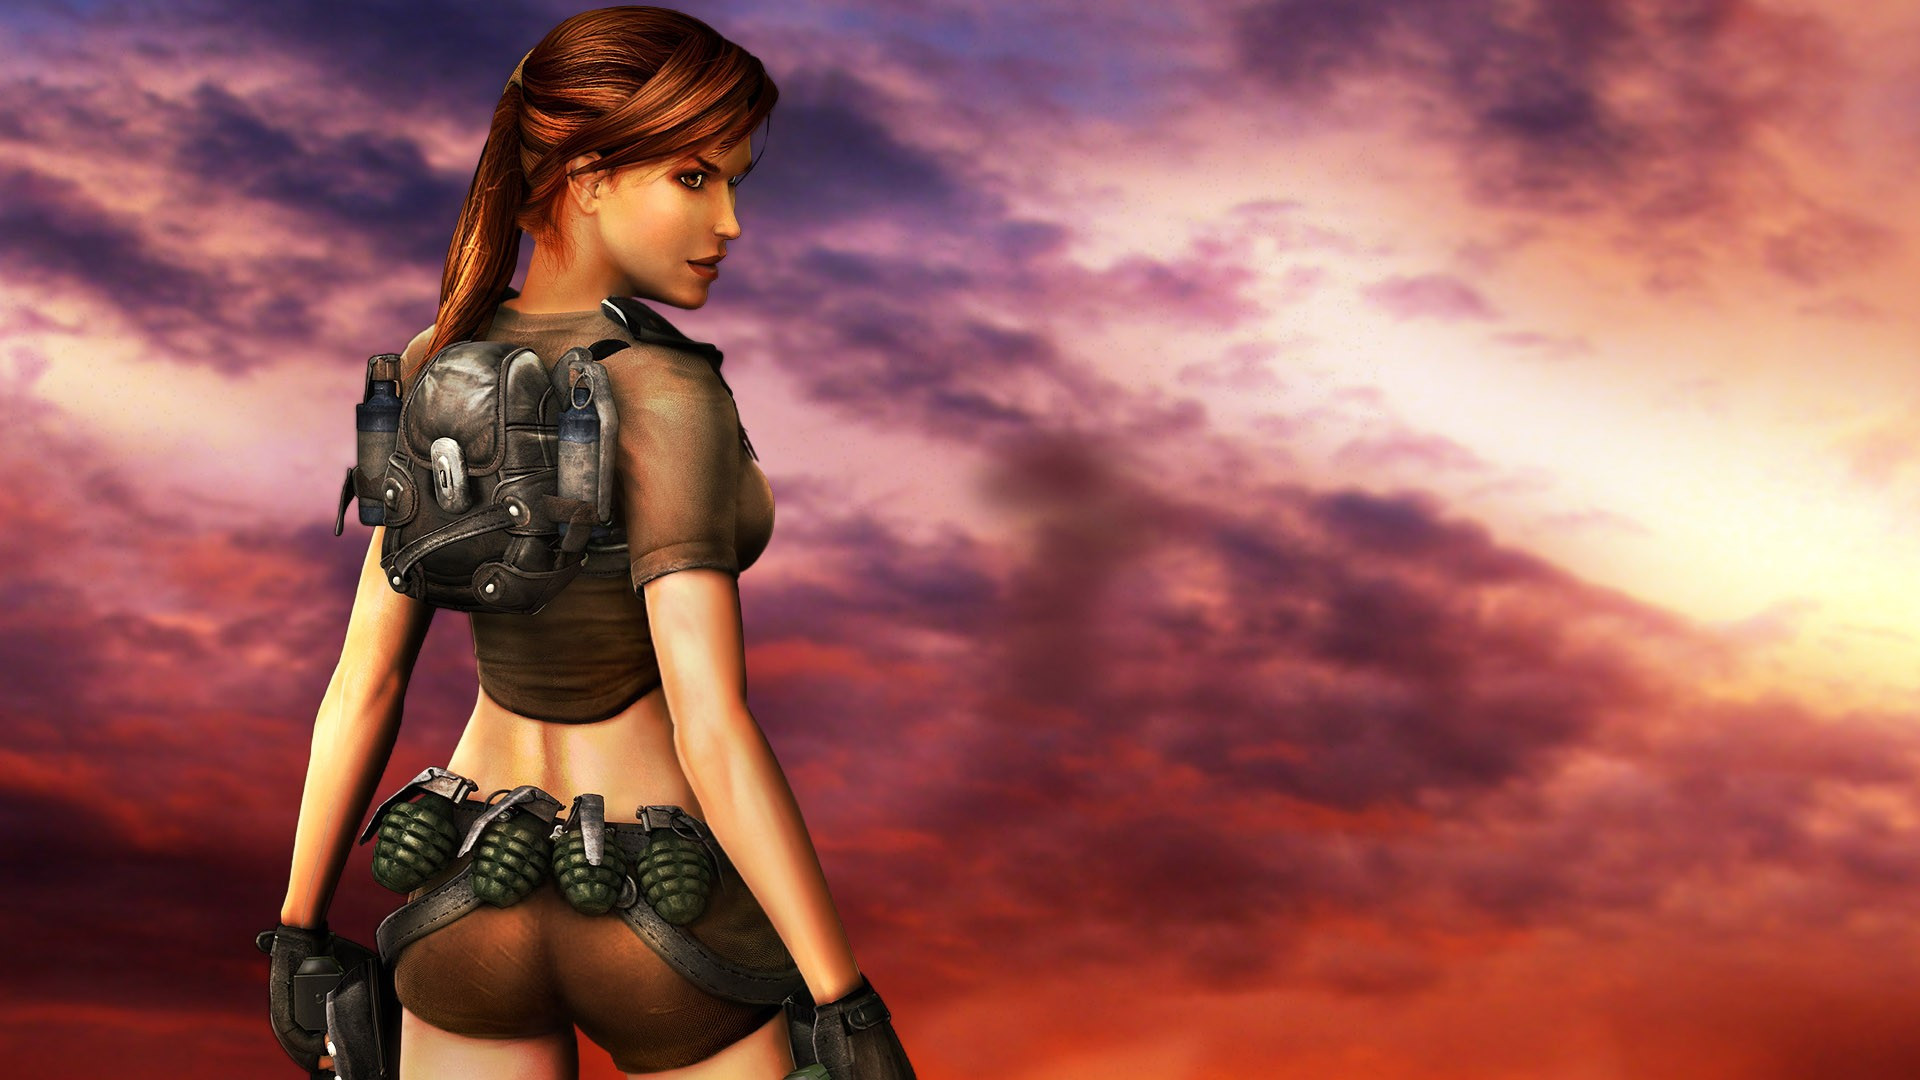 Page 3 Of 15 For 15 Most Sexy Pictures Of Lara Croft